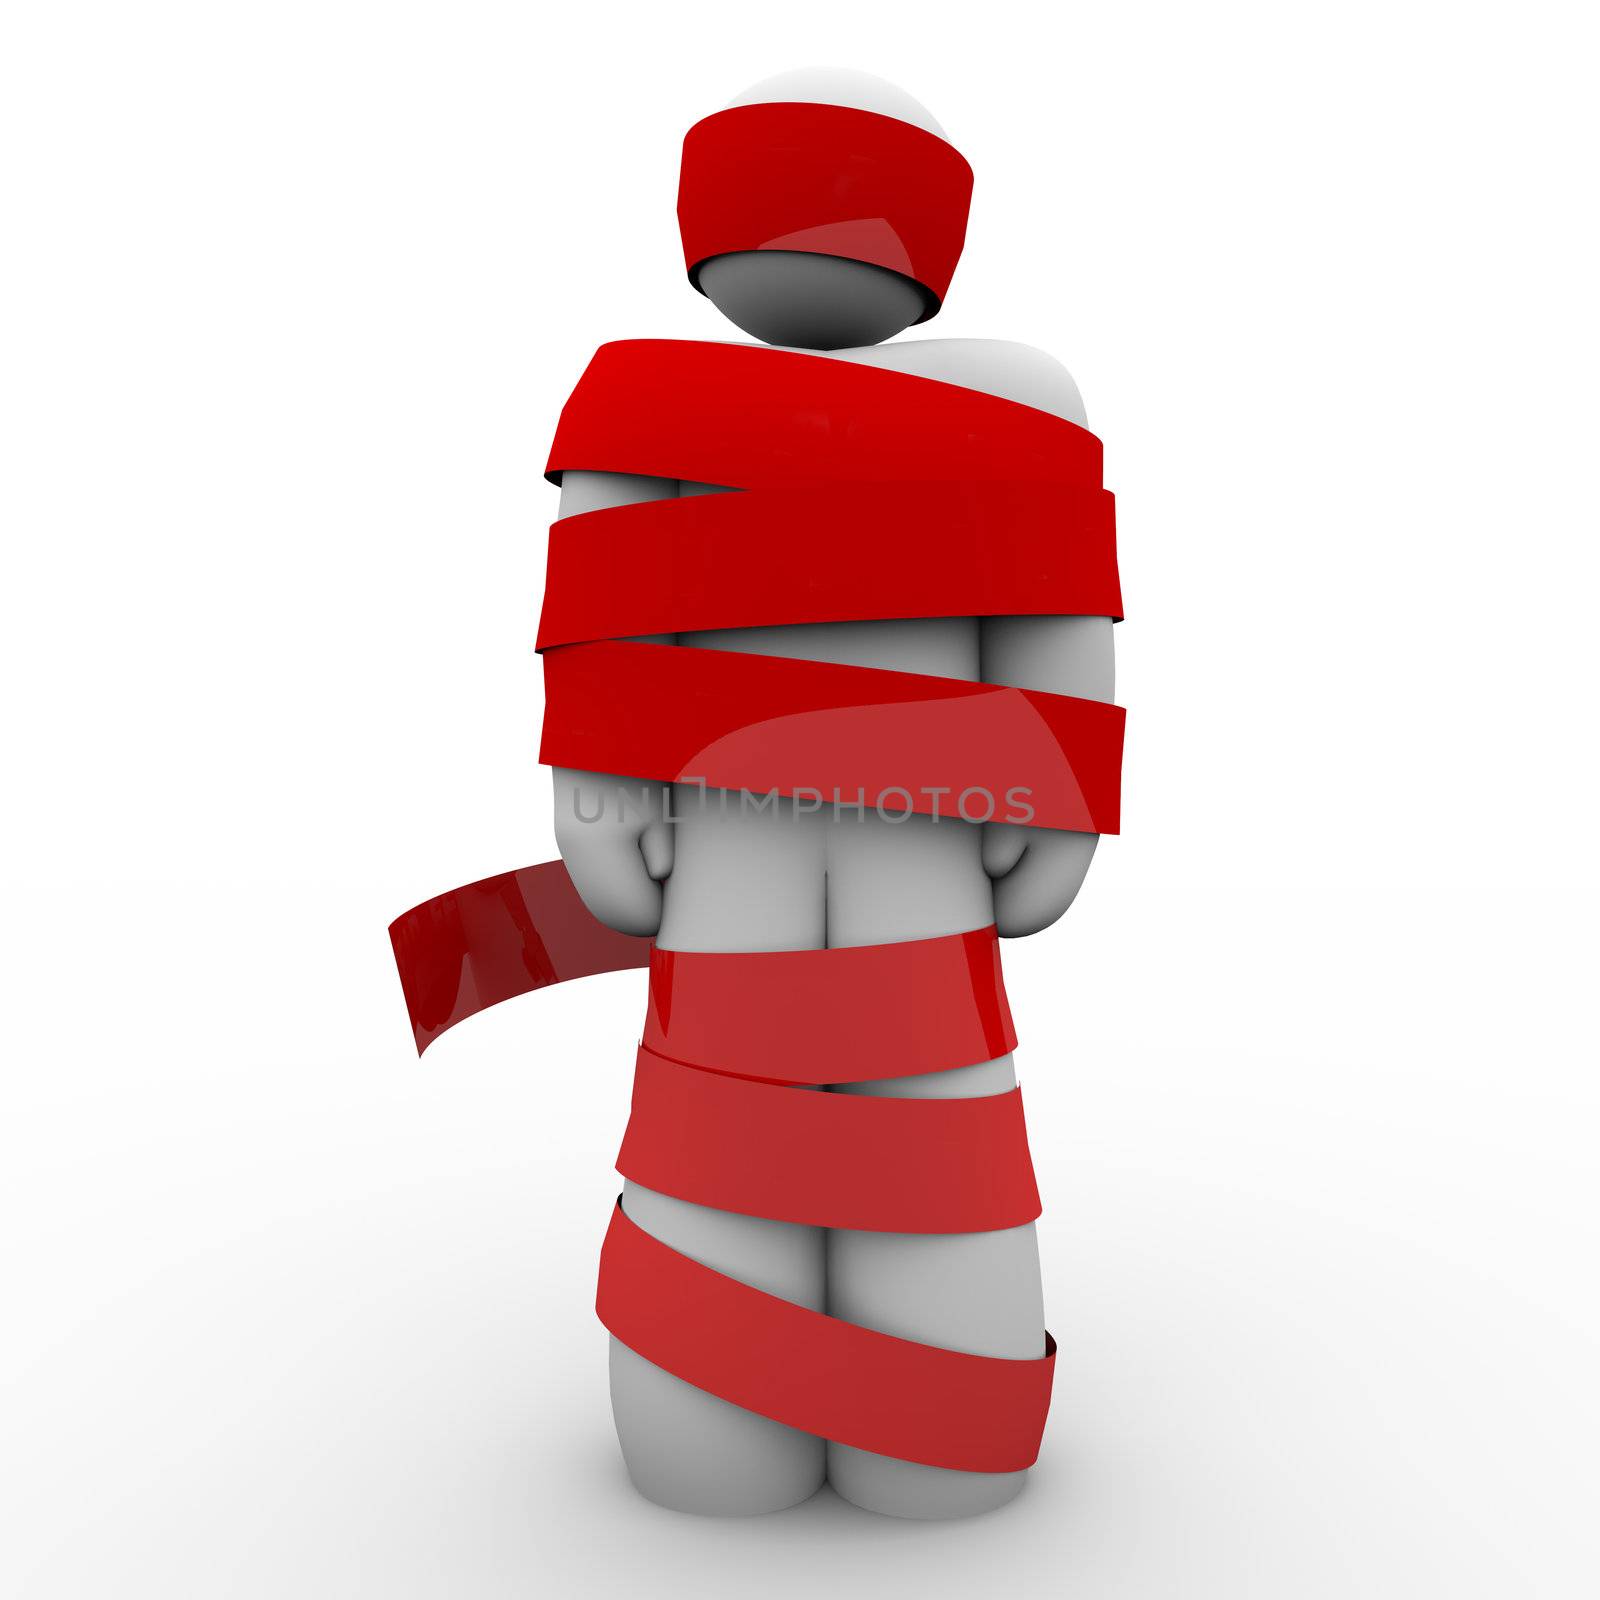 A man is wrapped in red tape representing being immobolized due to bureaucracy, kidnapping, fear or other concept keeping him from moving or acting